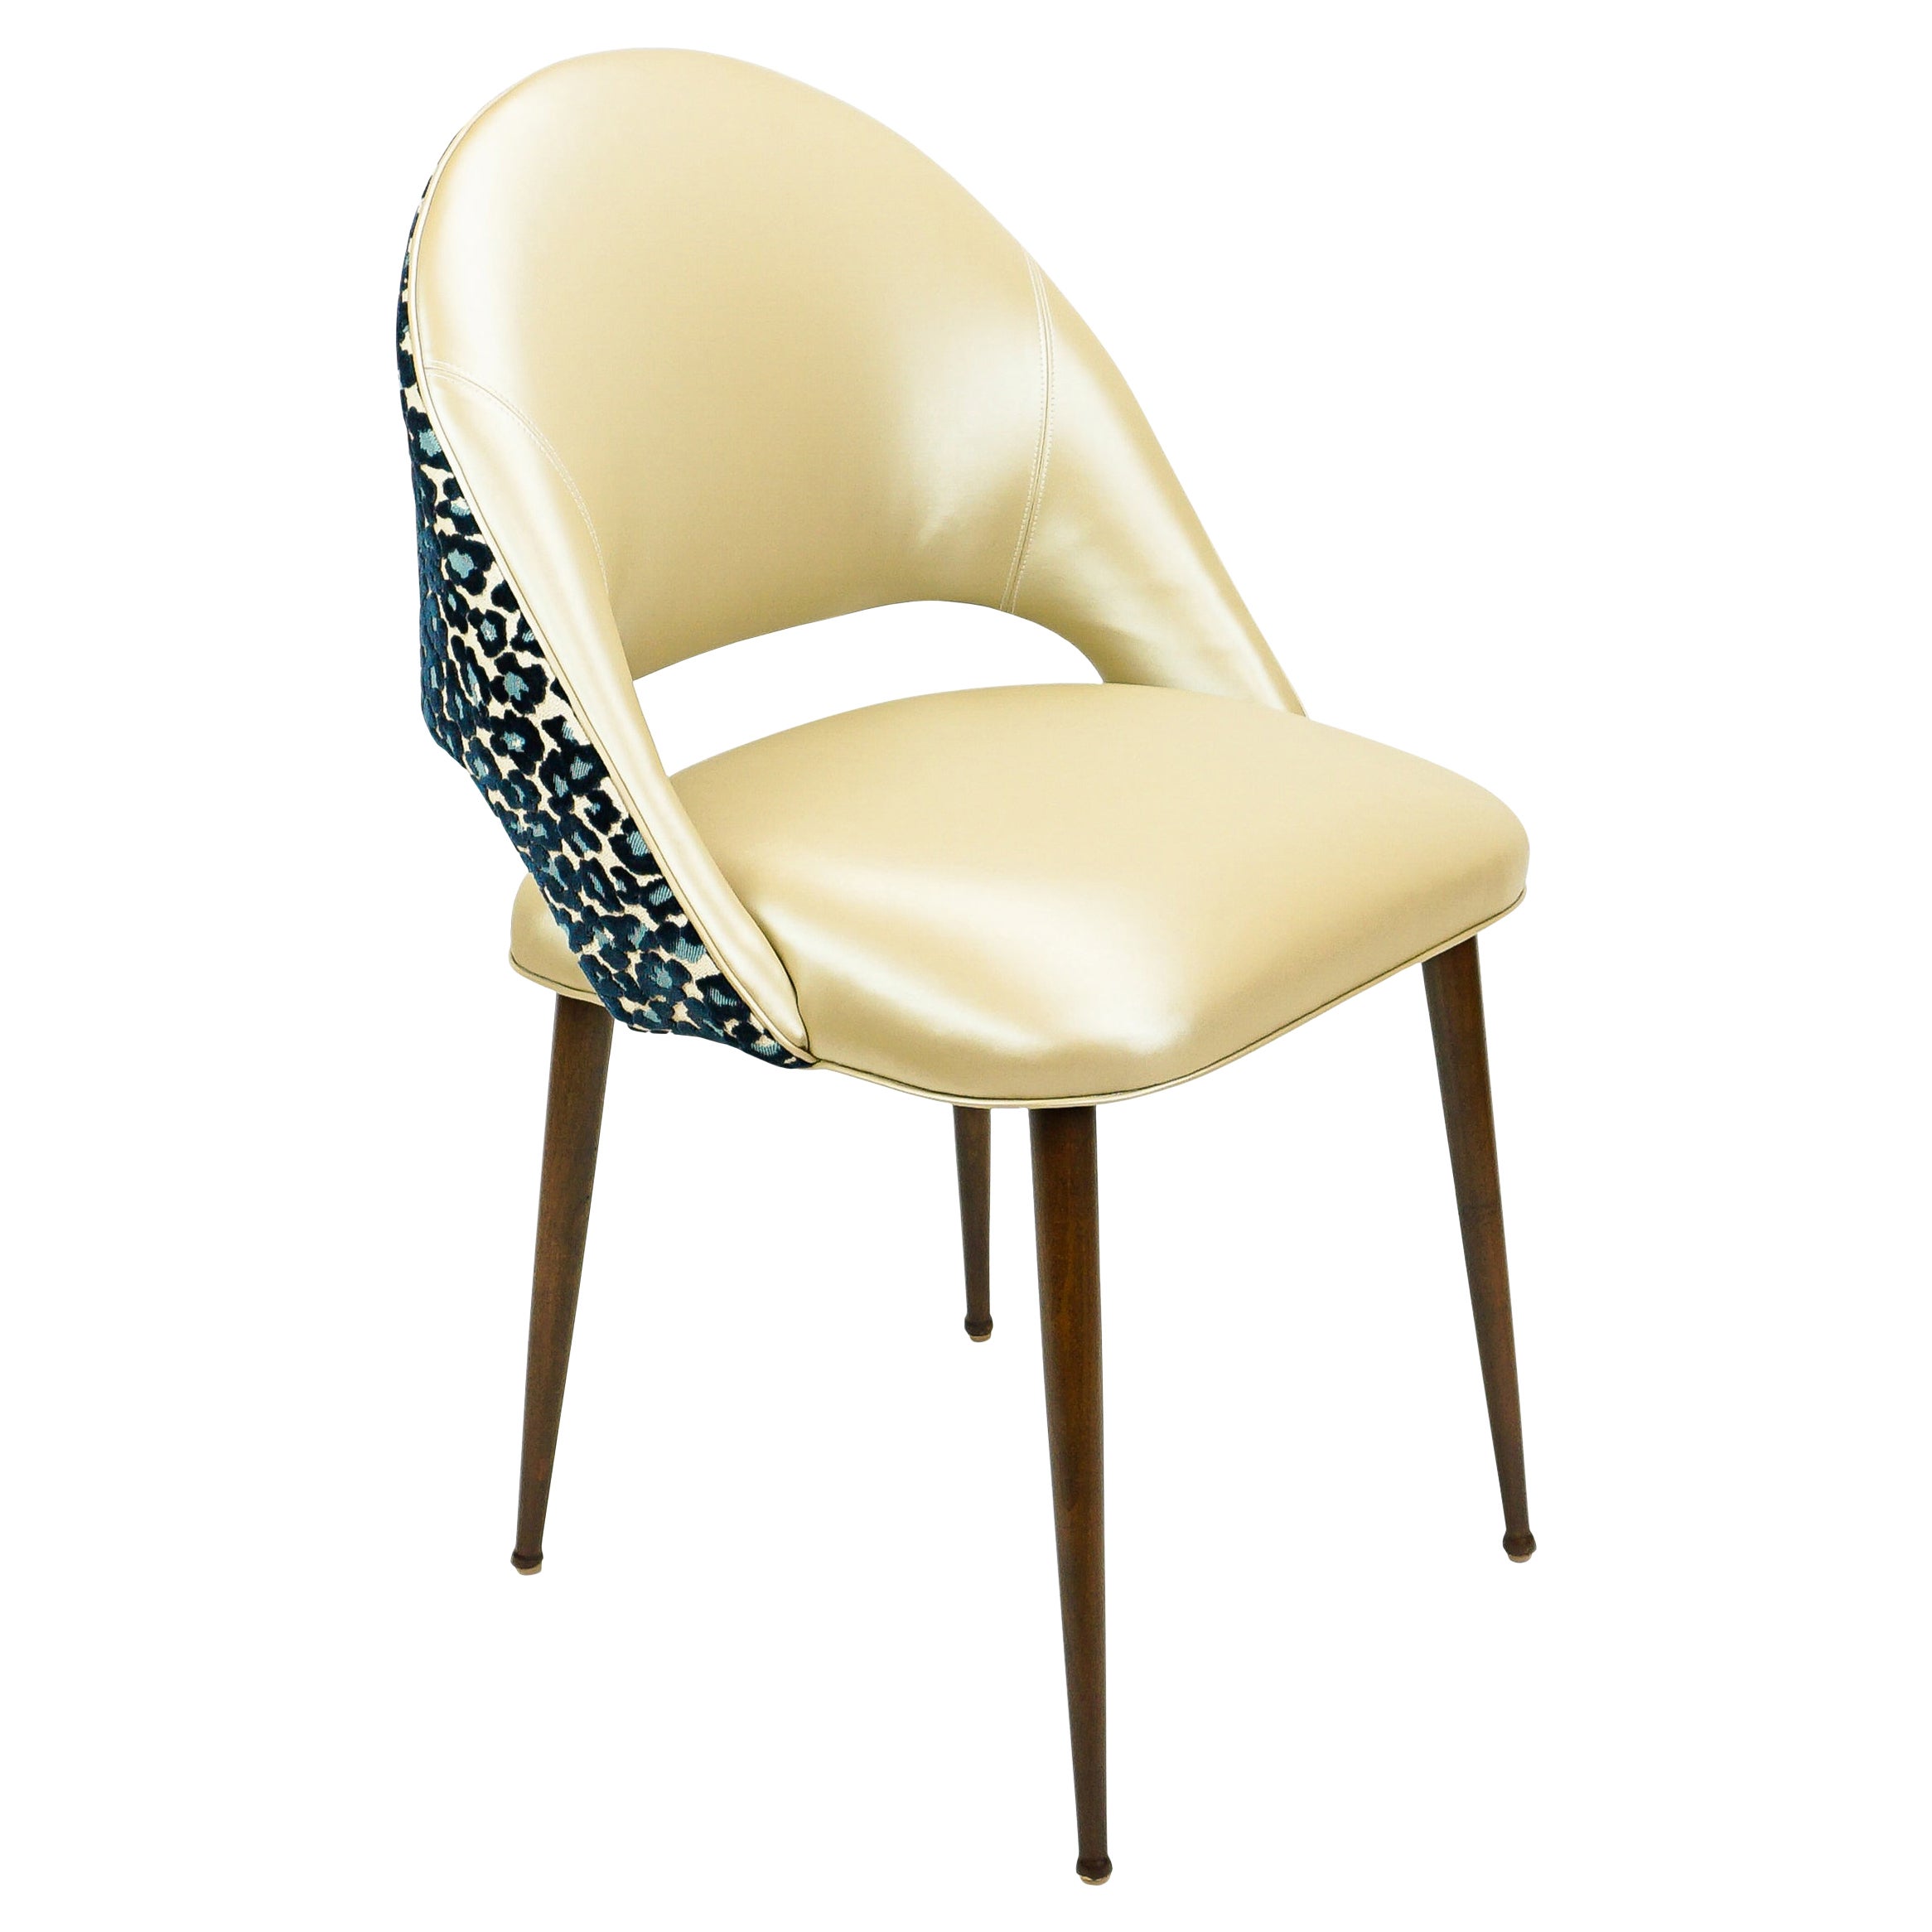 Golden Vinyl Dining Chair with Blue Leopard Back